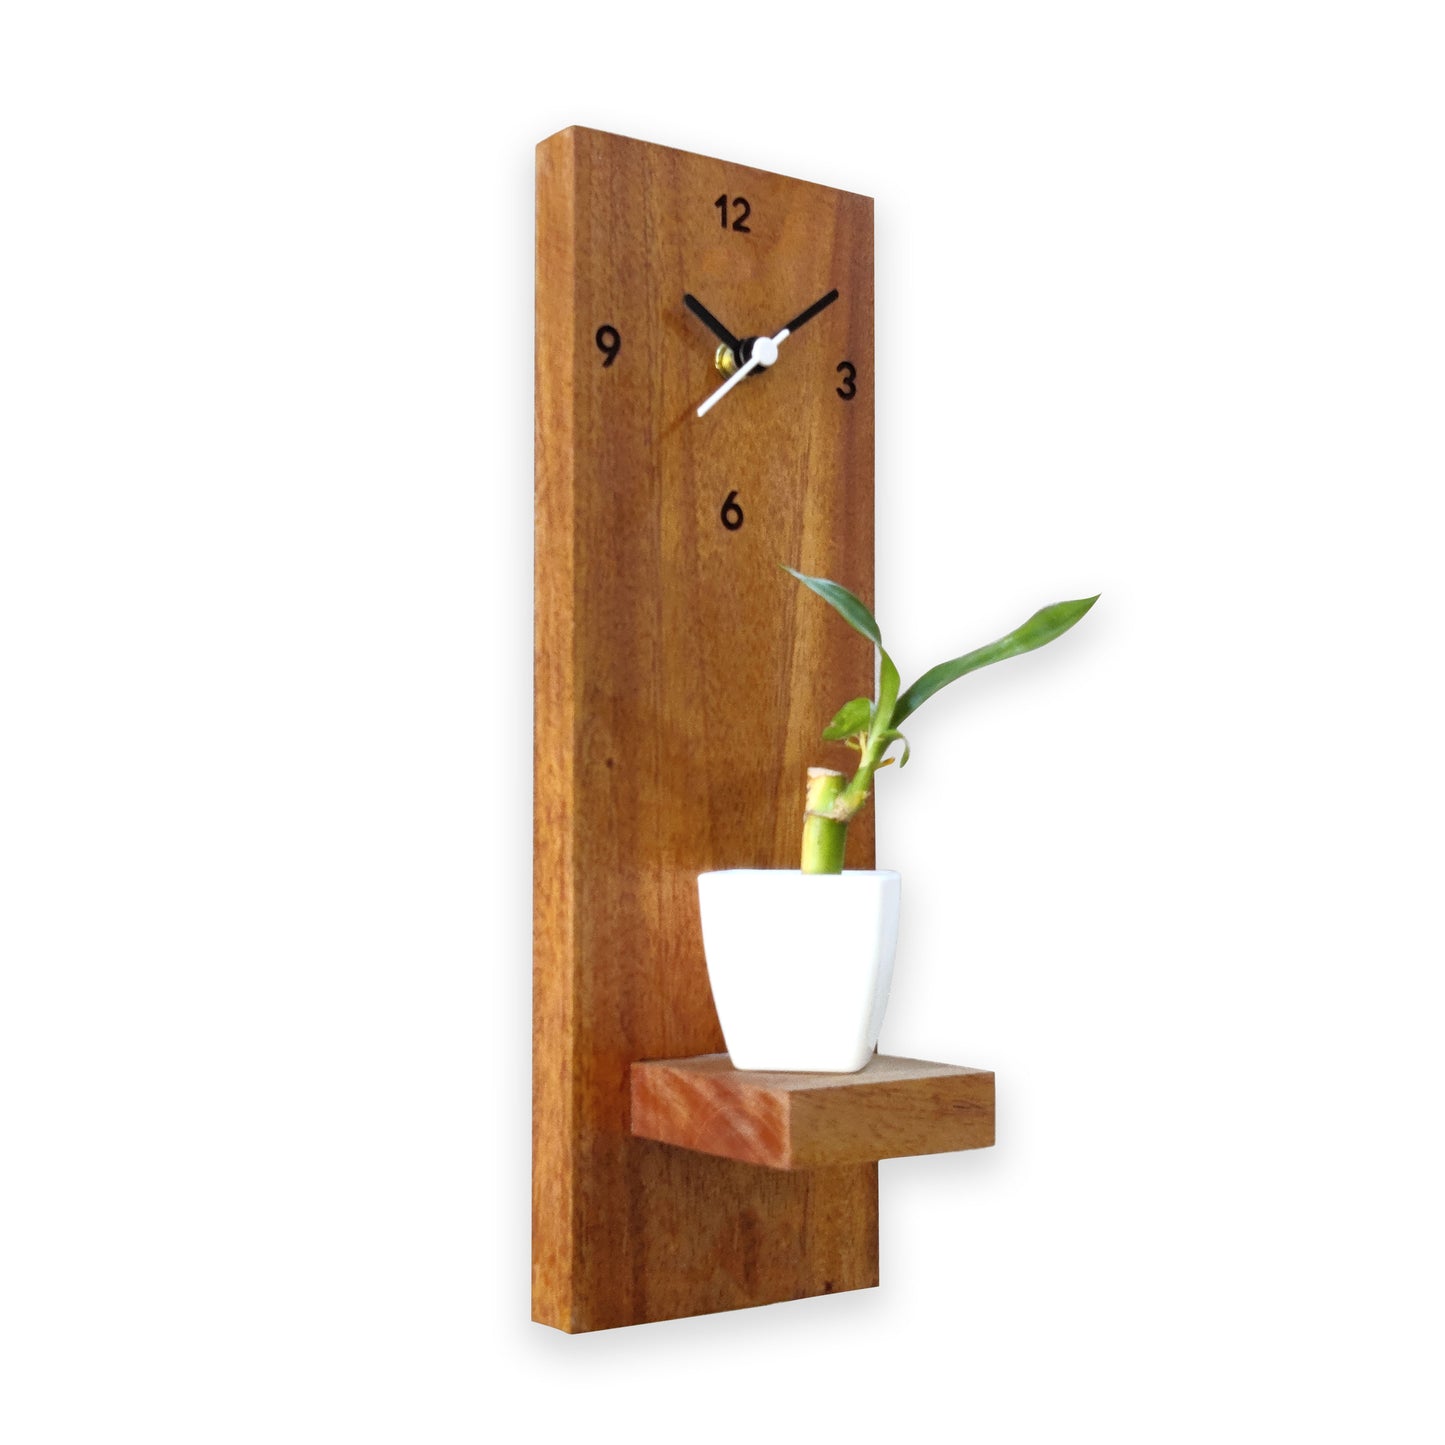 Wooden Hanging Planter with Clock Gift